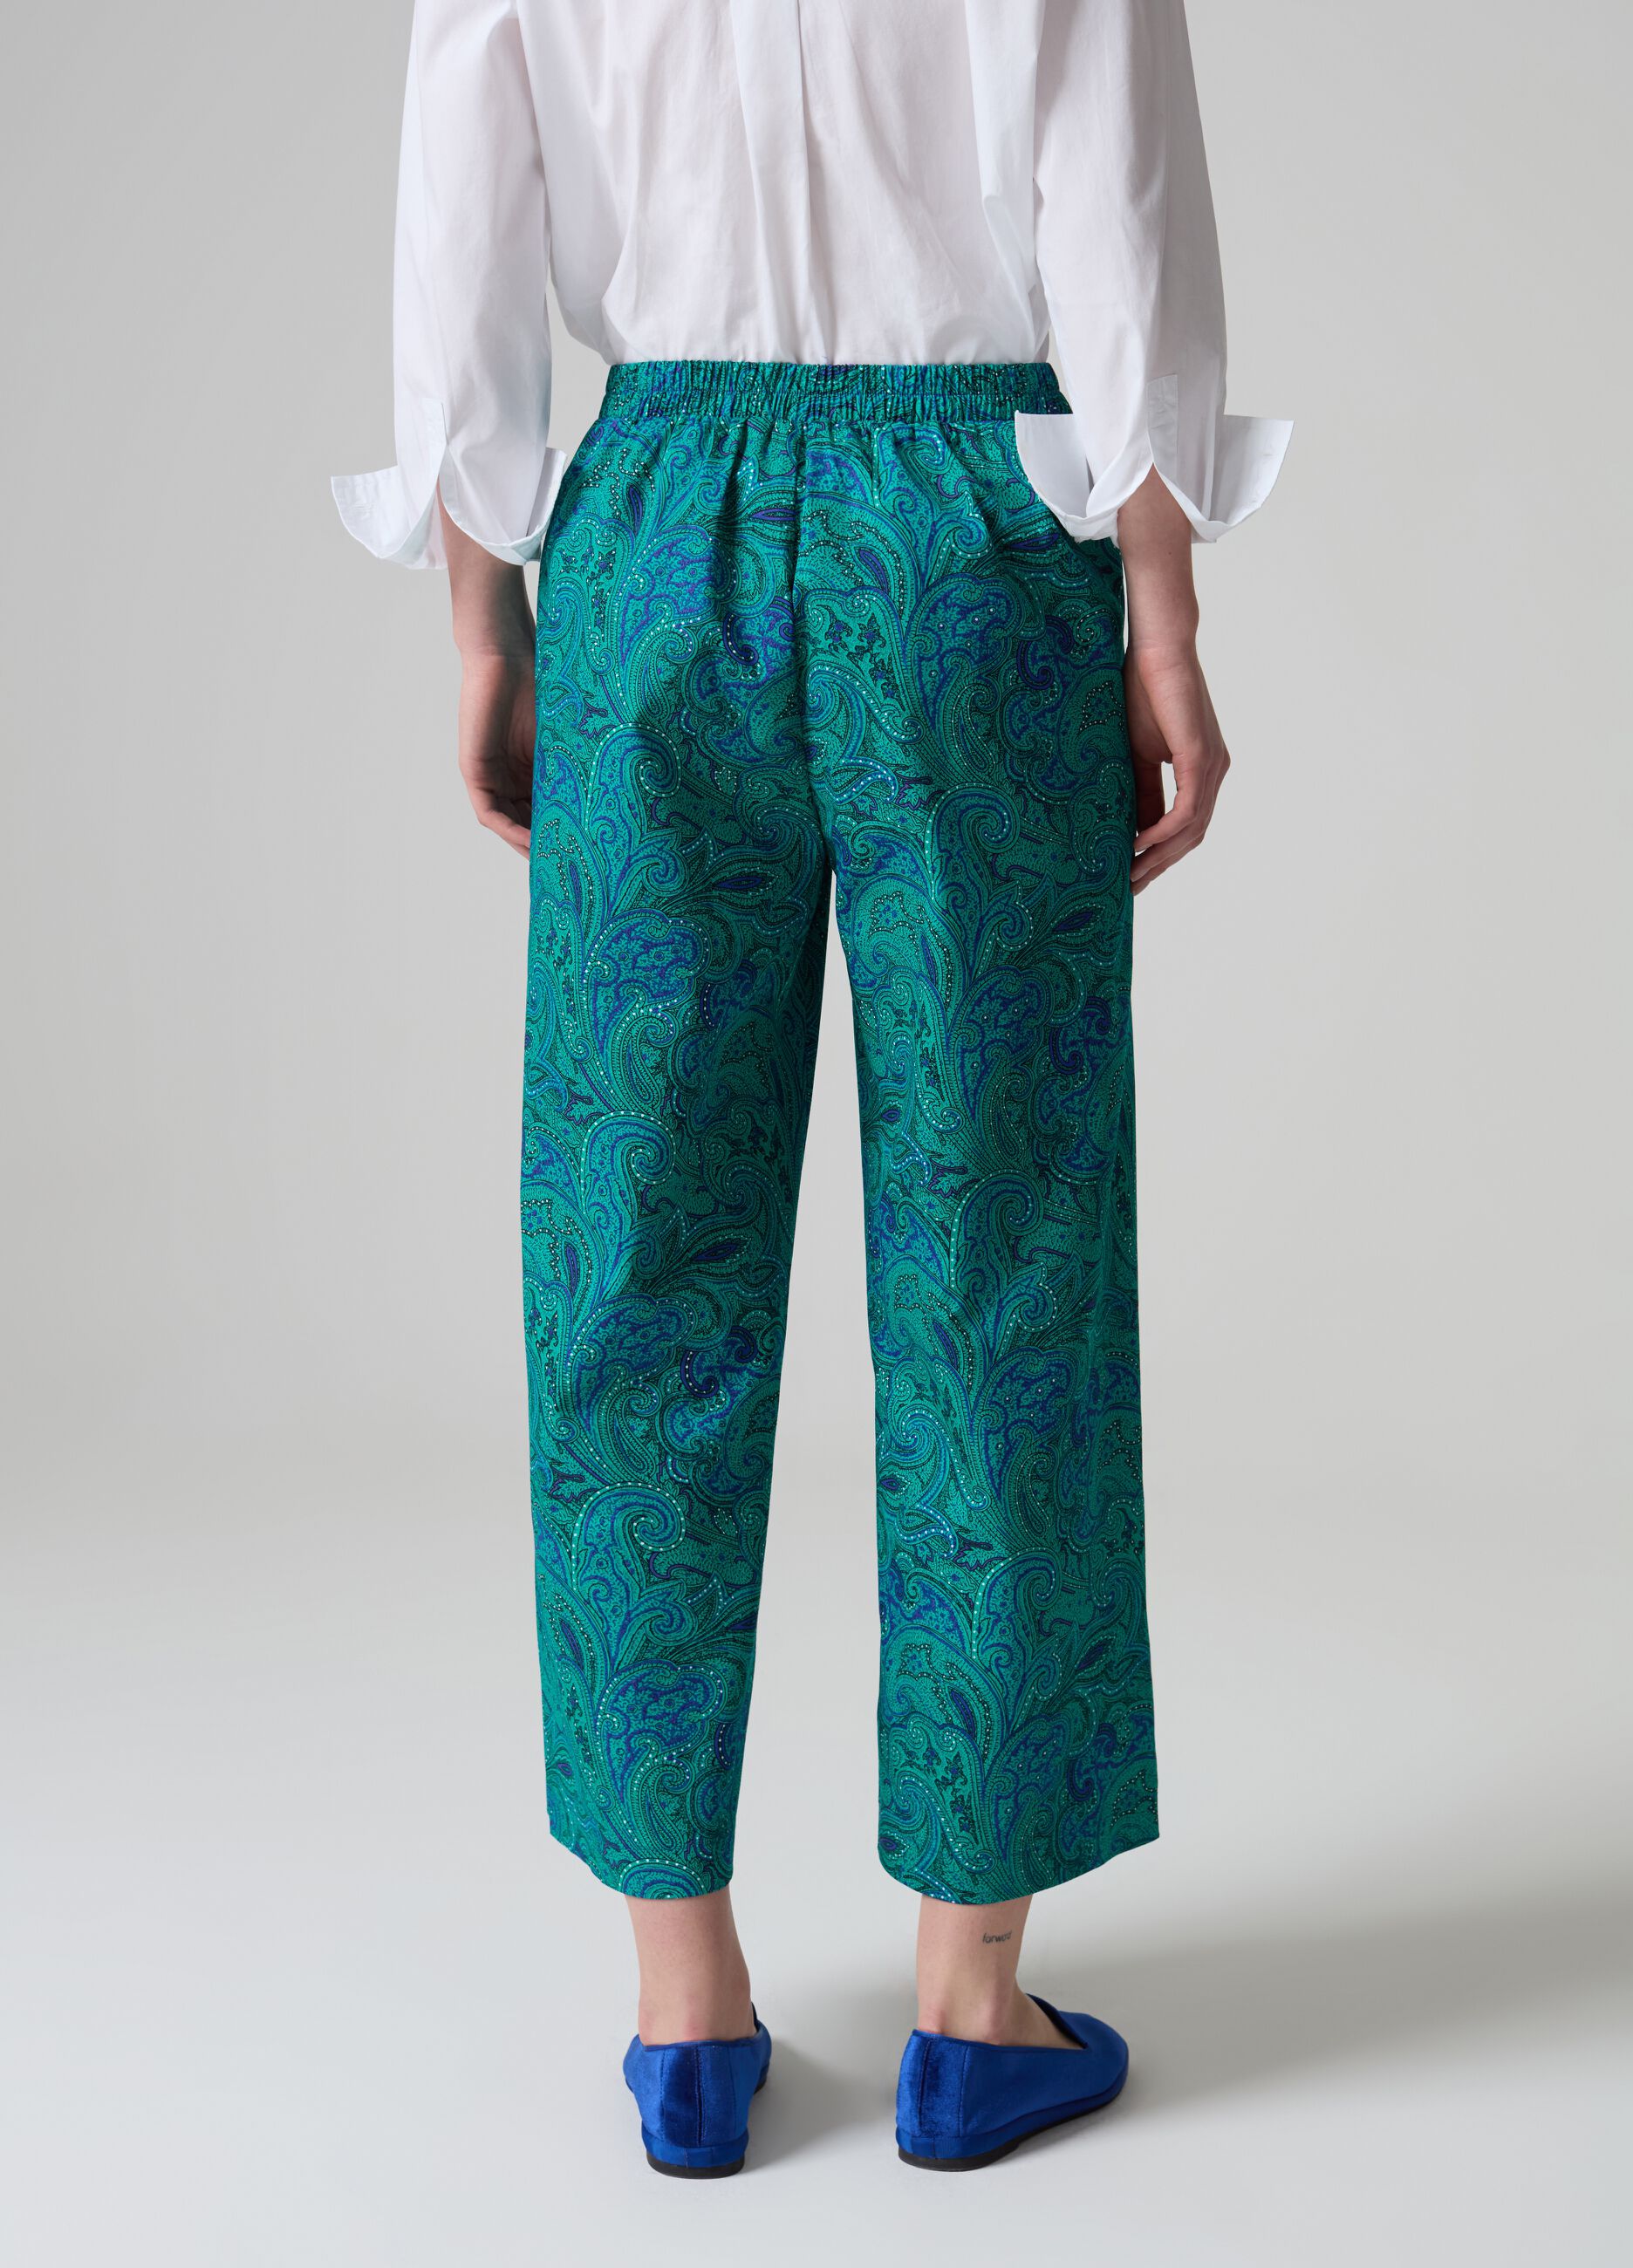 PIOMBO Woman's Blue/Green Wide-leg crop trousers with paisley print | OVS